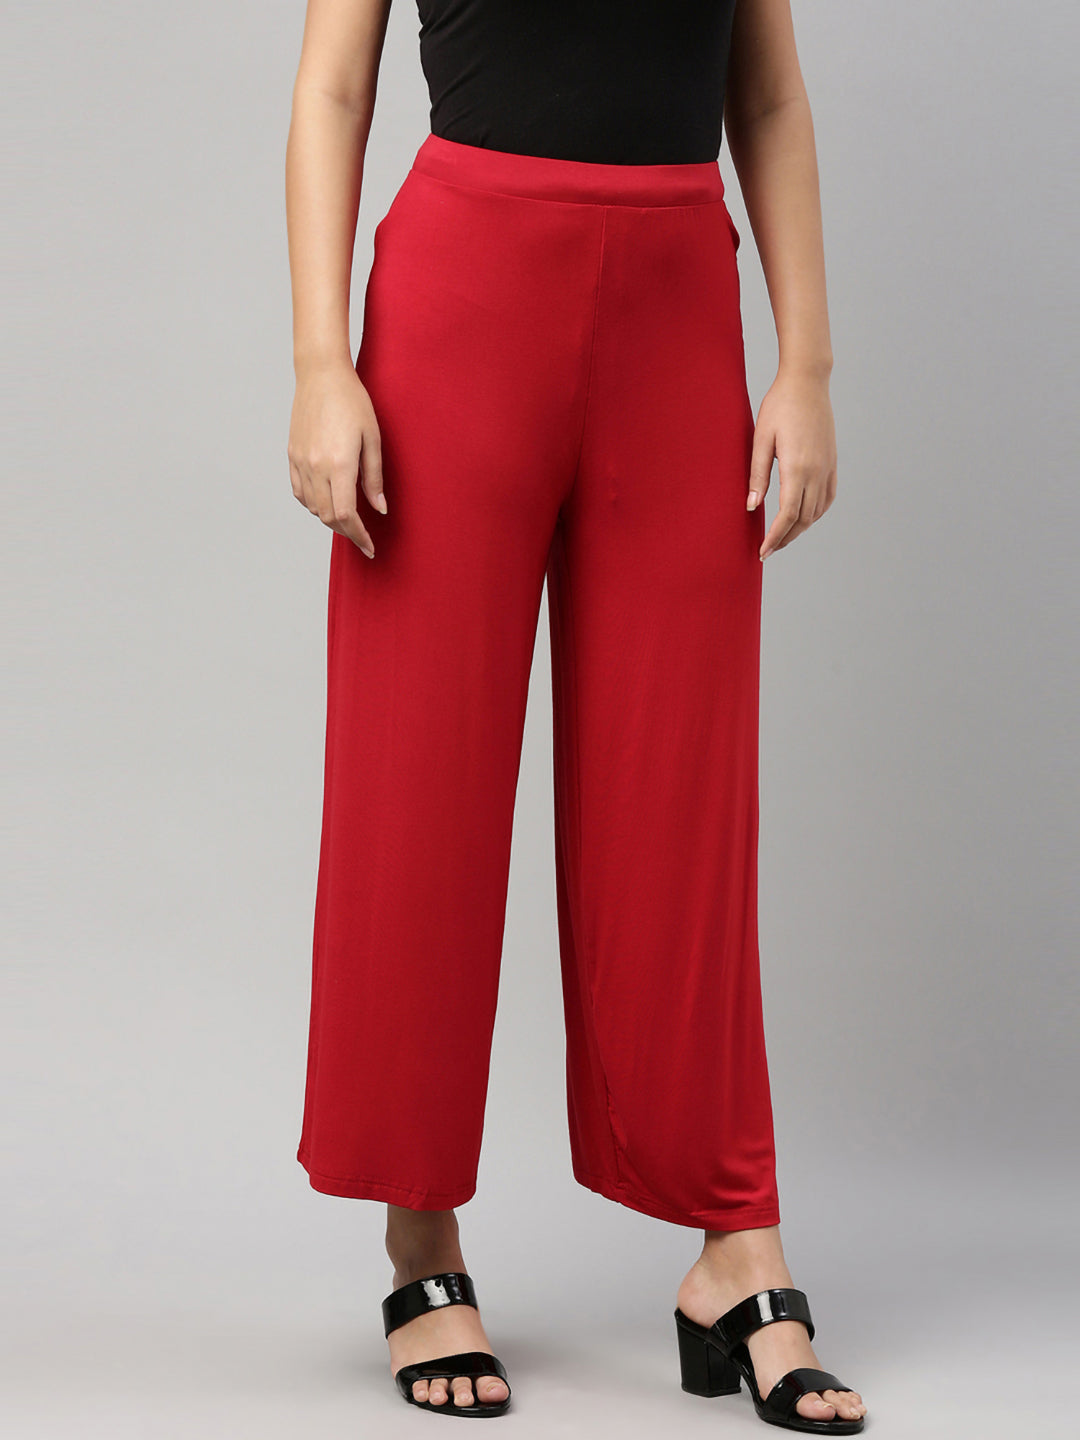 Party Wear Fabclub Women's Heavy Rayon Solid Plain Free Size Red Palazzo  Pants